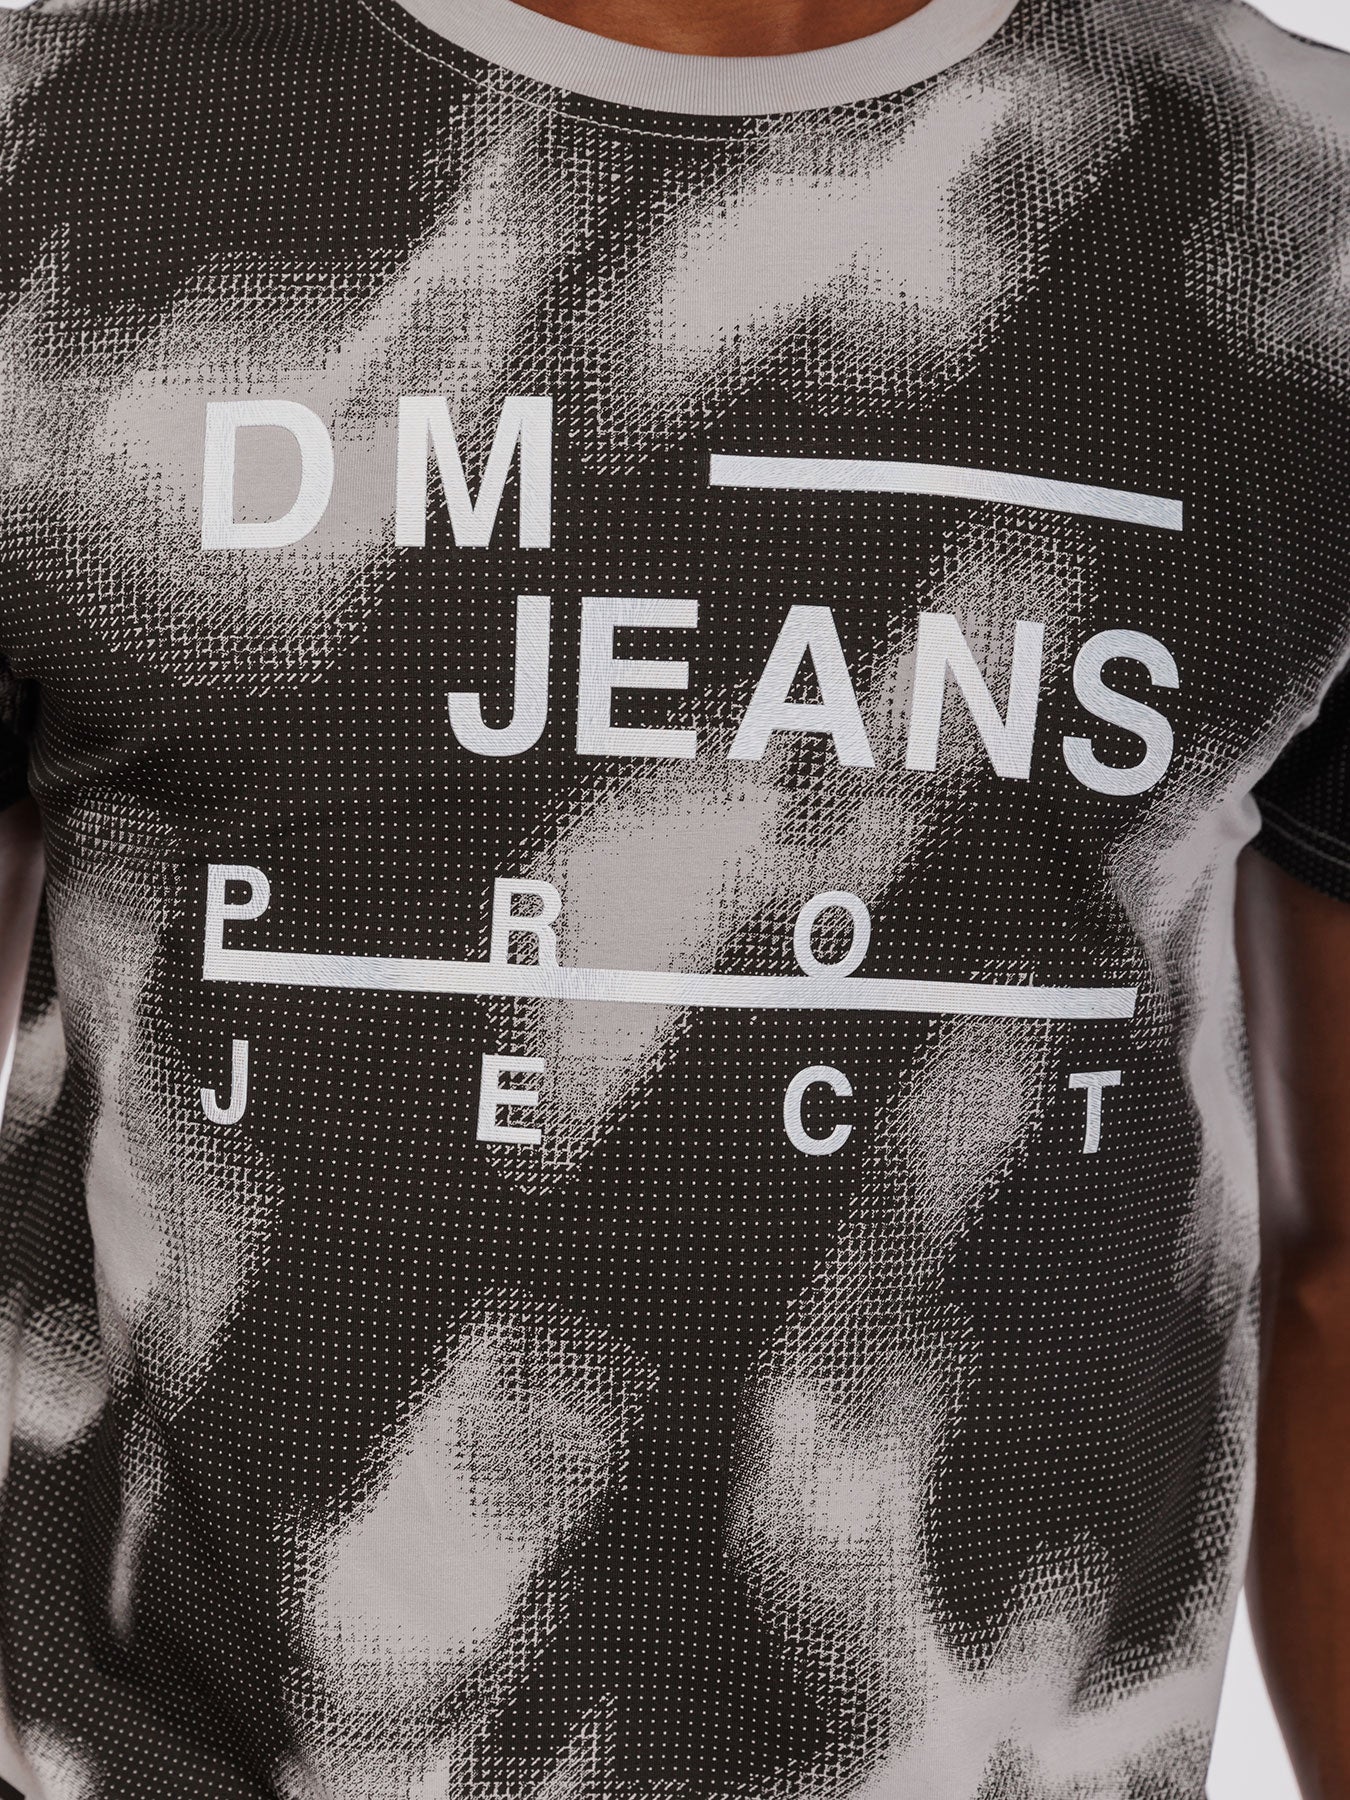 "D M J Project" Graphic Tee